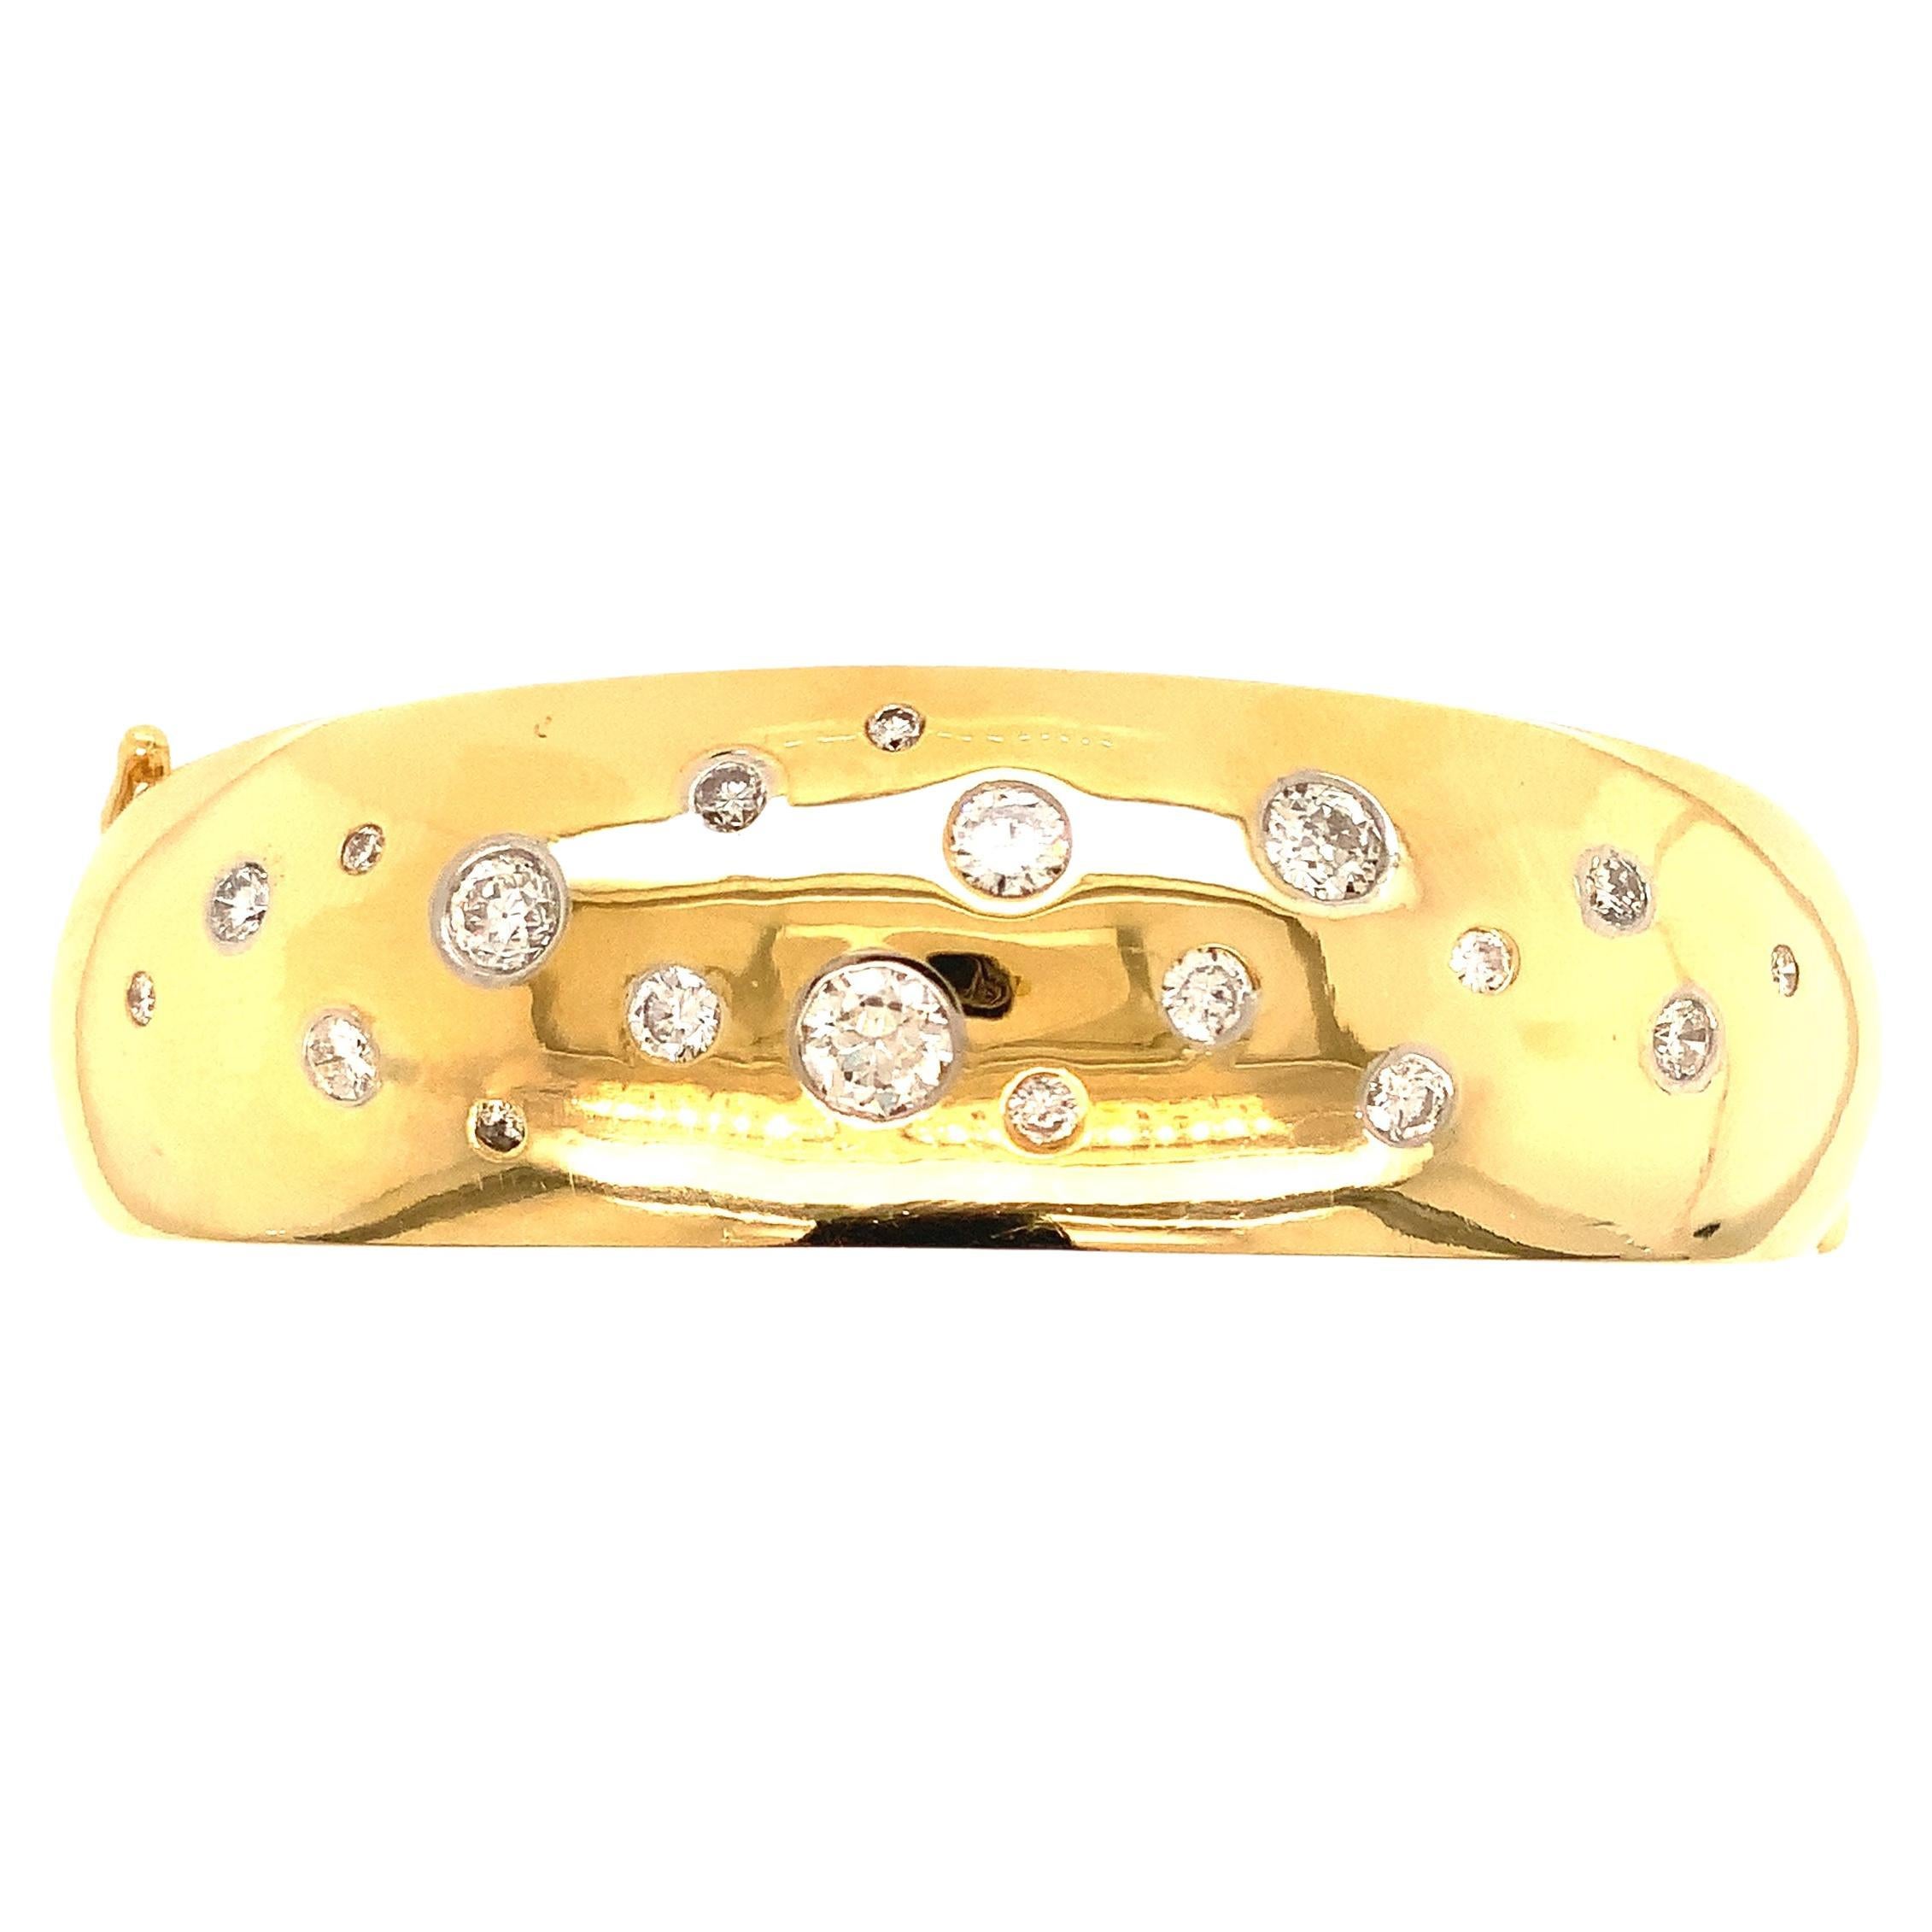 This one-of-a-kind Vintage Heavy 18 kt yellow Gold Handmade Italian Diamond Bangle features 19 Flush Set Polished and graduated Bezel Set Diamonds graduating from 0.06 to 0.25 carat each, totaling 1.46 carats. The 19 brilliant-cut diamonds boast a